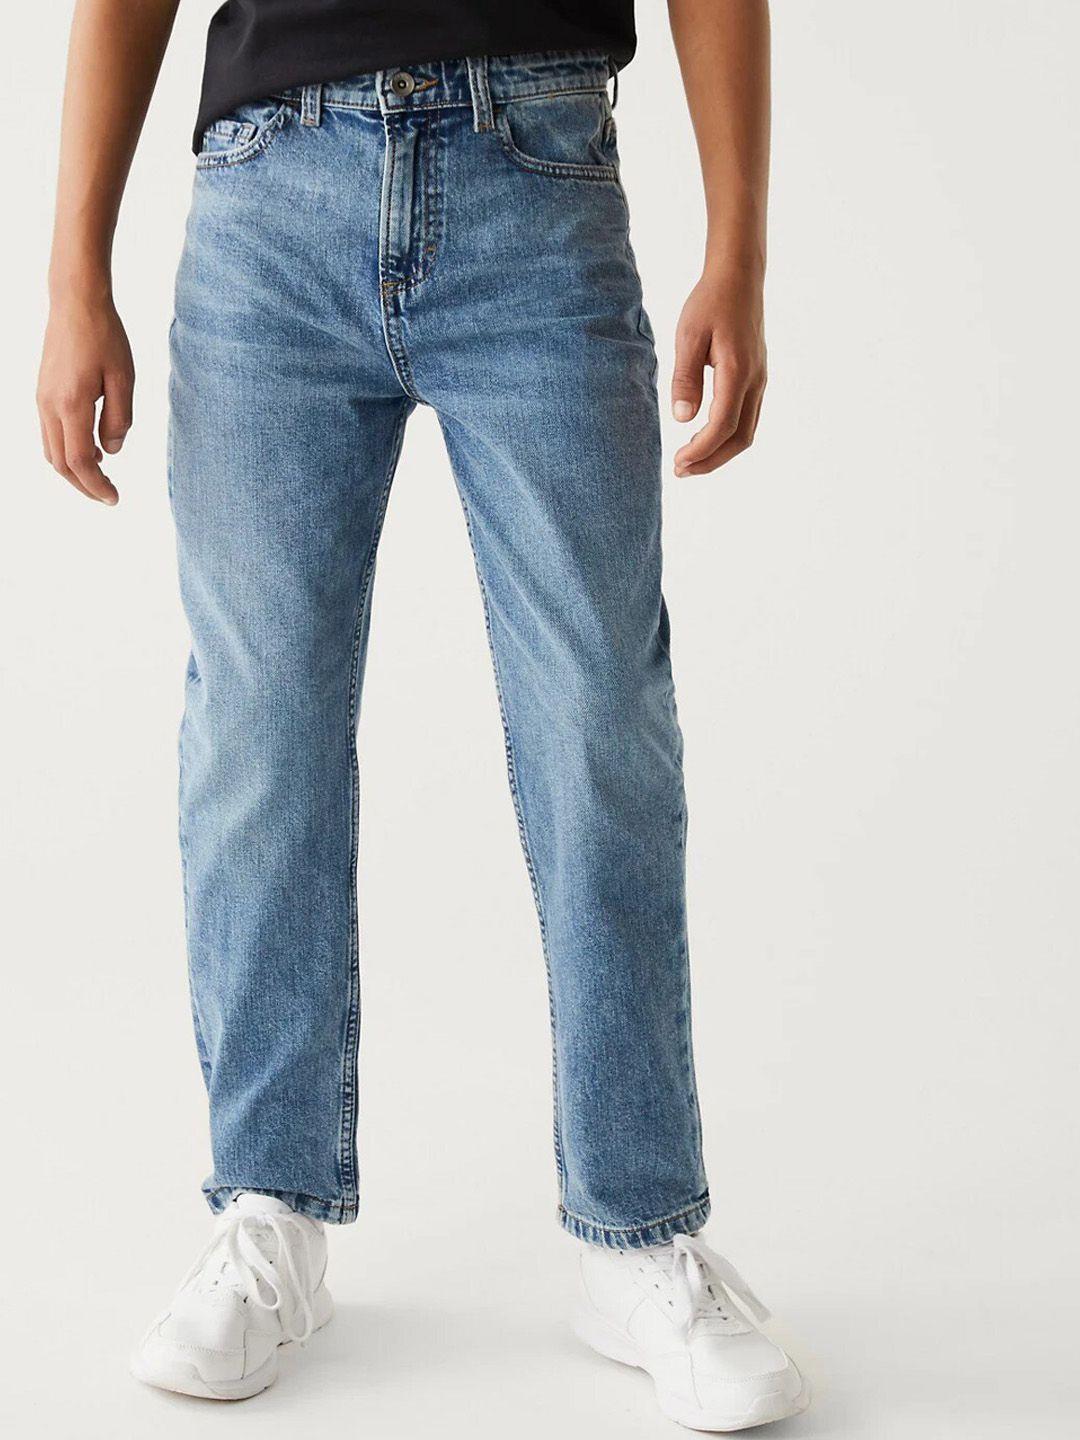 marks & spencer boys mid rise clean look heavy fade jeans